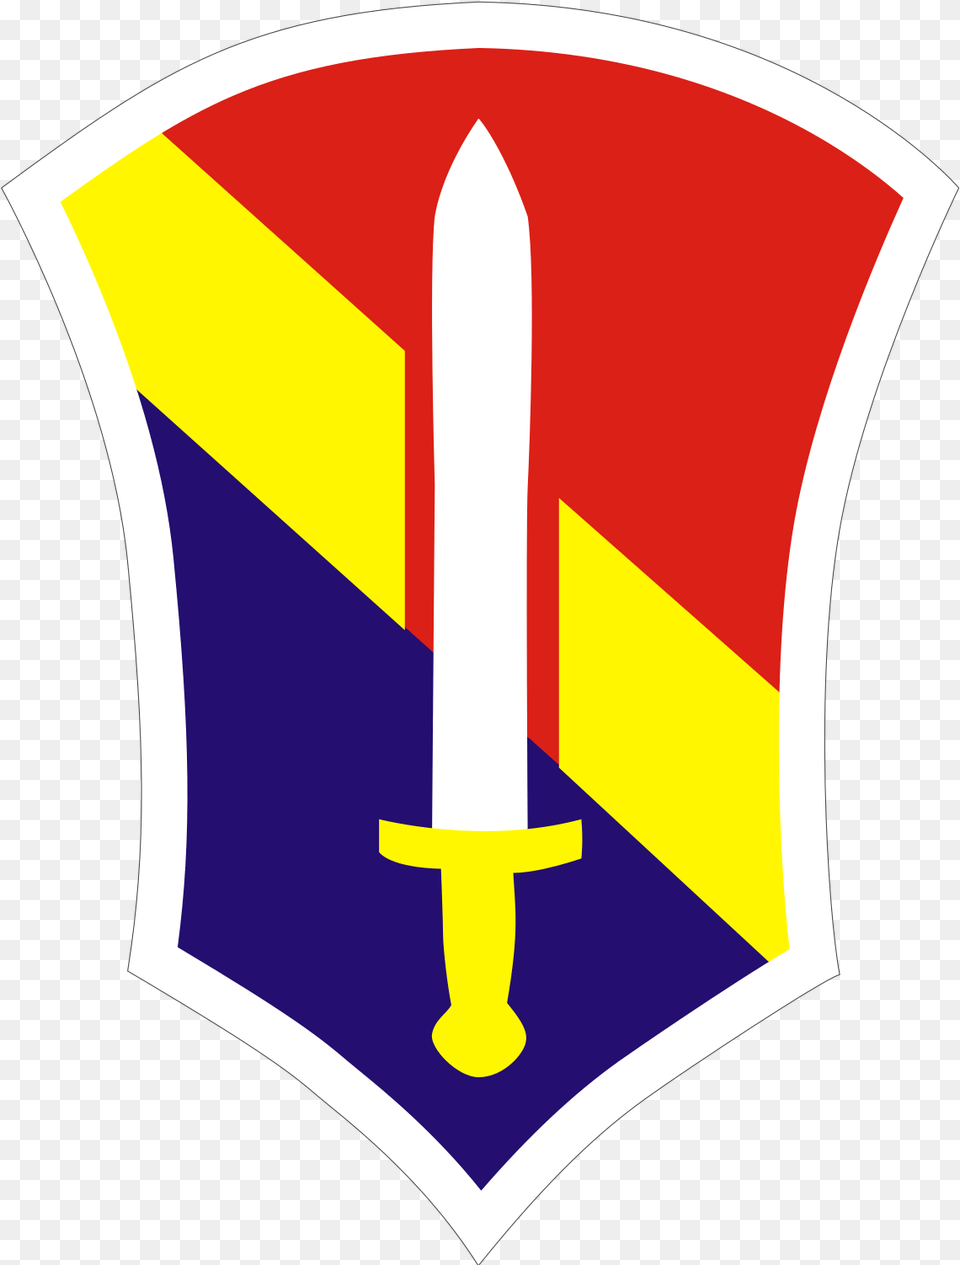 1st Field Force Vietnam Patch, Sword, Weapon, Armor, Shield Png Image